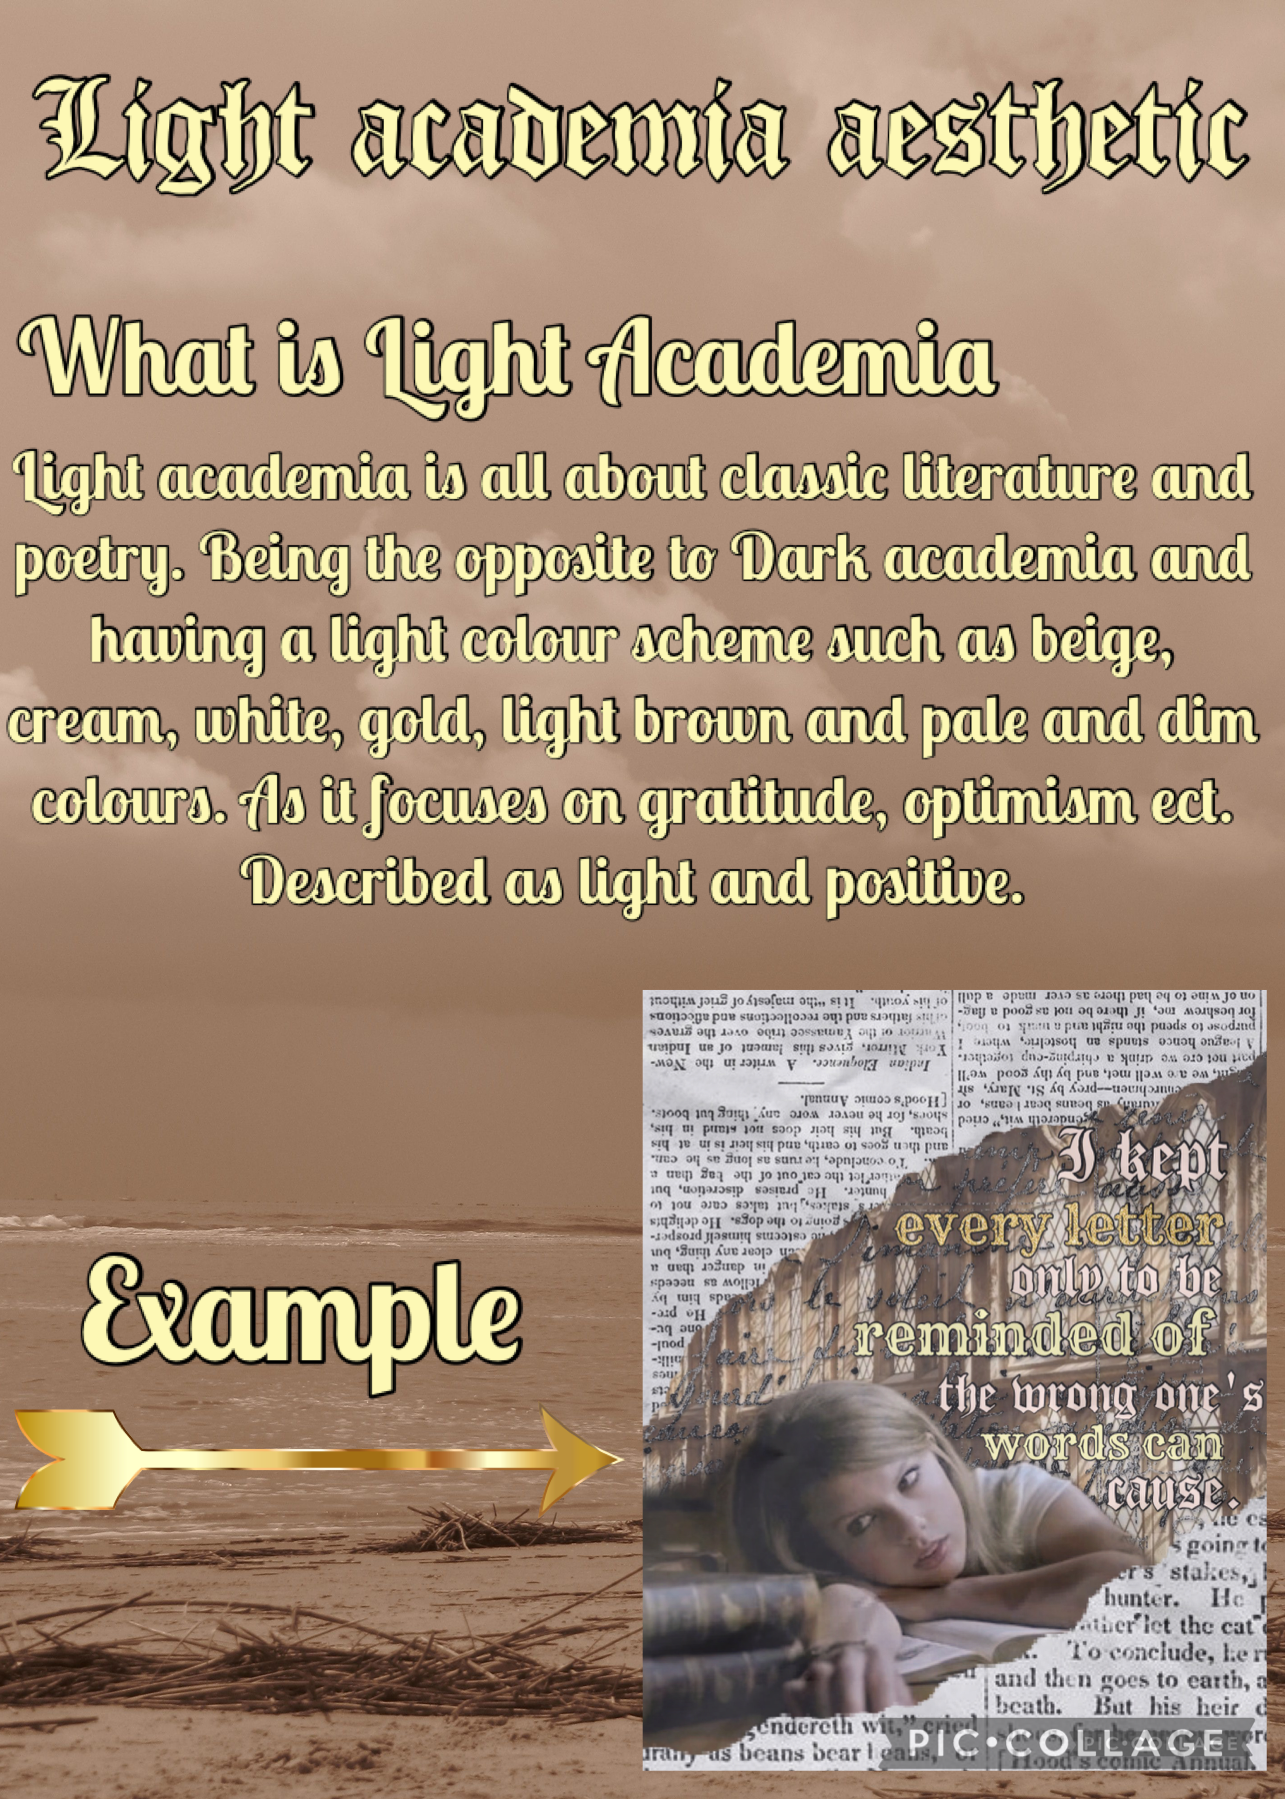 19.11.21 Light academia aesthetic part of the aesthetic series 